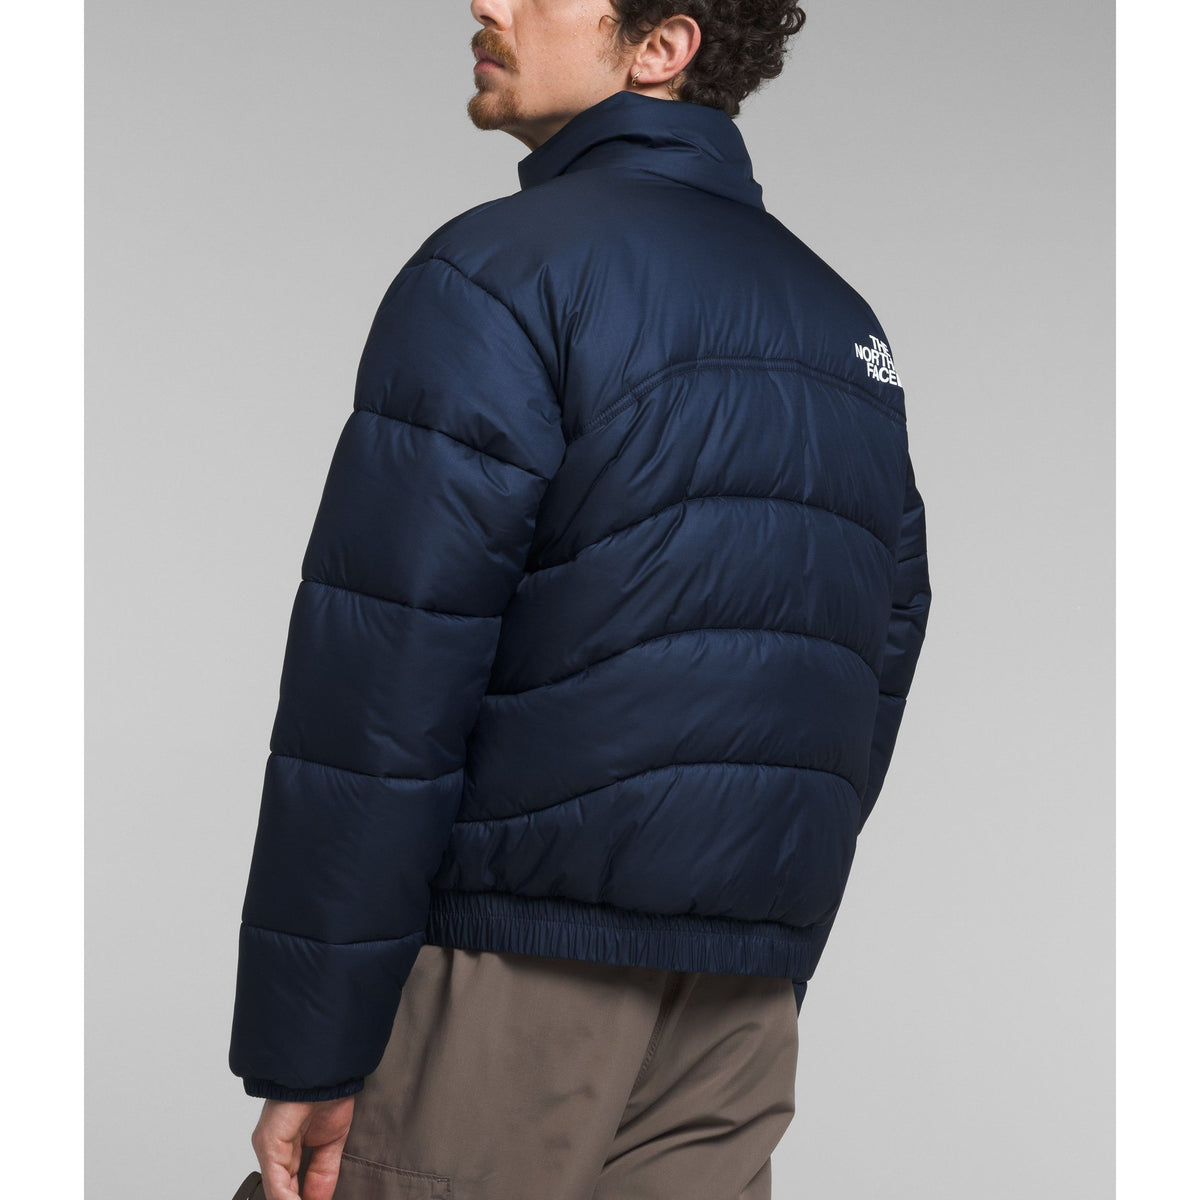 The North Face Men's Jacket 2000 in Summit Navy | Footprint USA